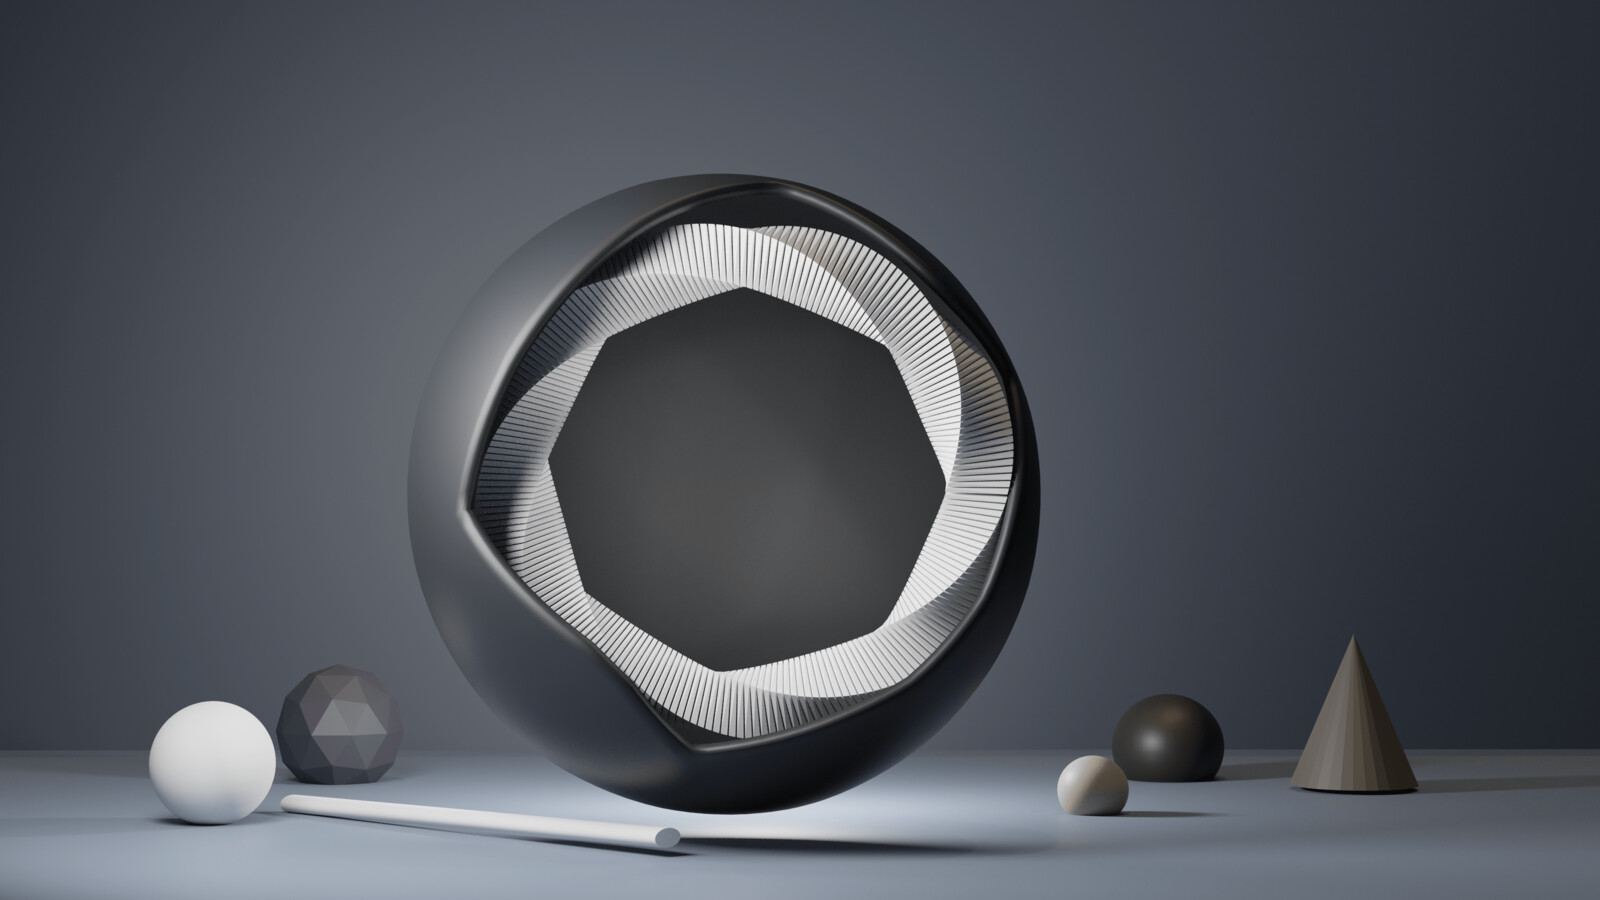 Minimalistic Abstract Shapes render